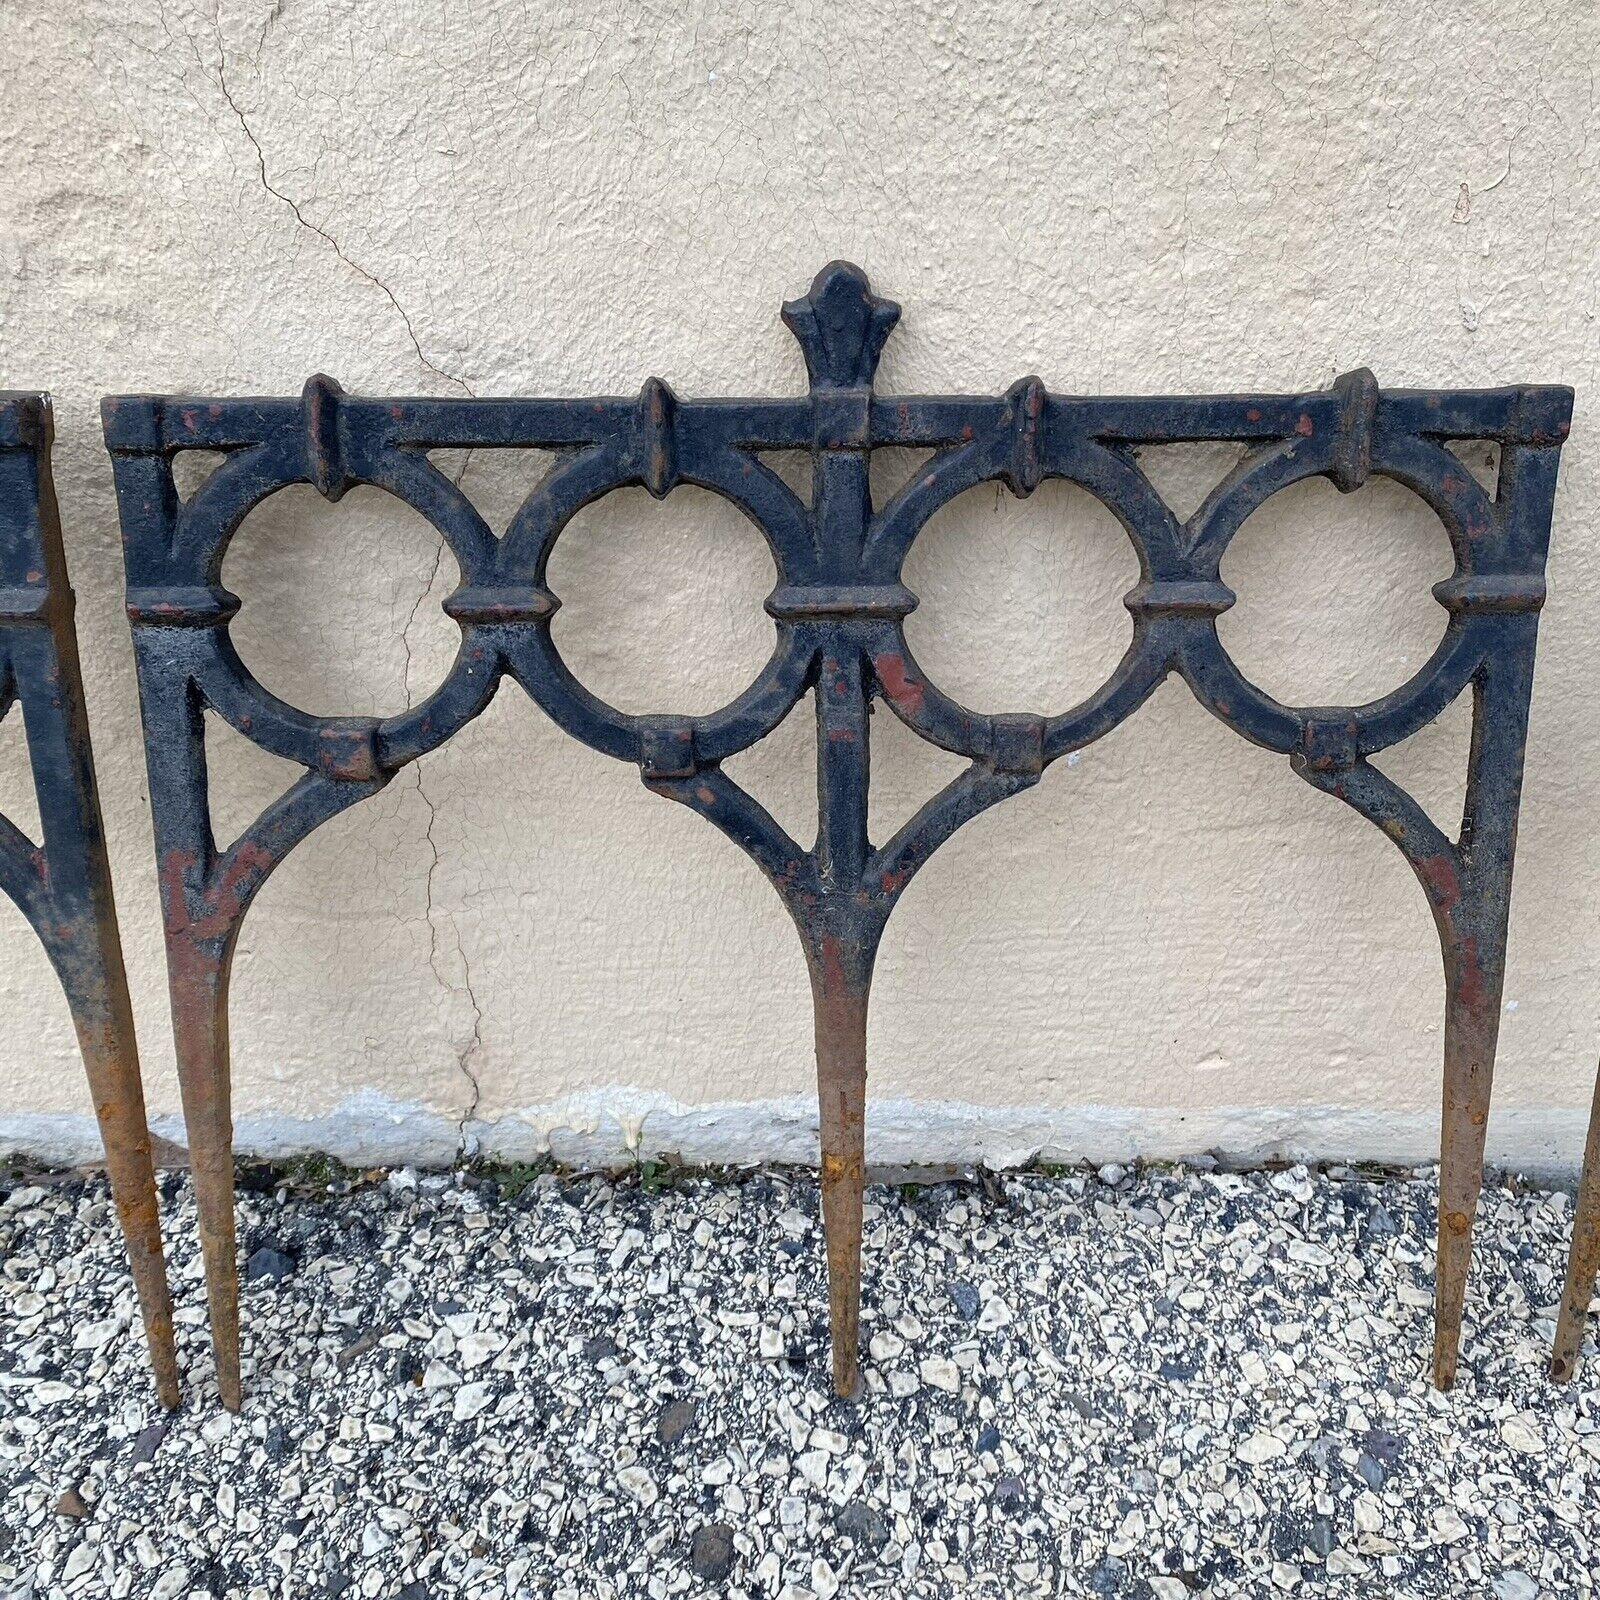 Antique French Victorian Cast Iron Outdoor Garden Fence Edge Edging - Set of 8. Price includes all 8 pieces. Circa 19th Century. Measurements: 16